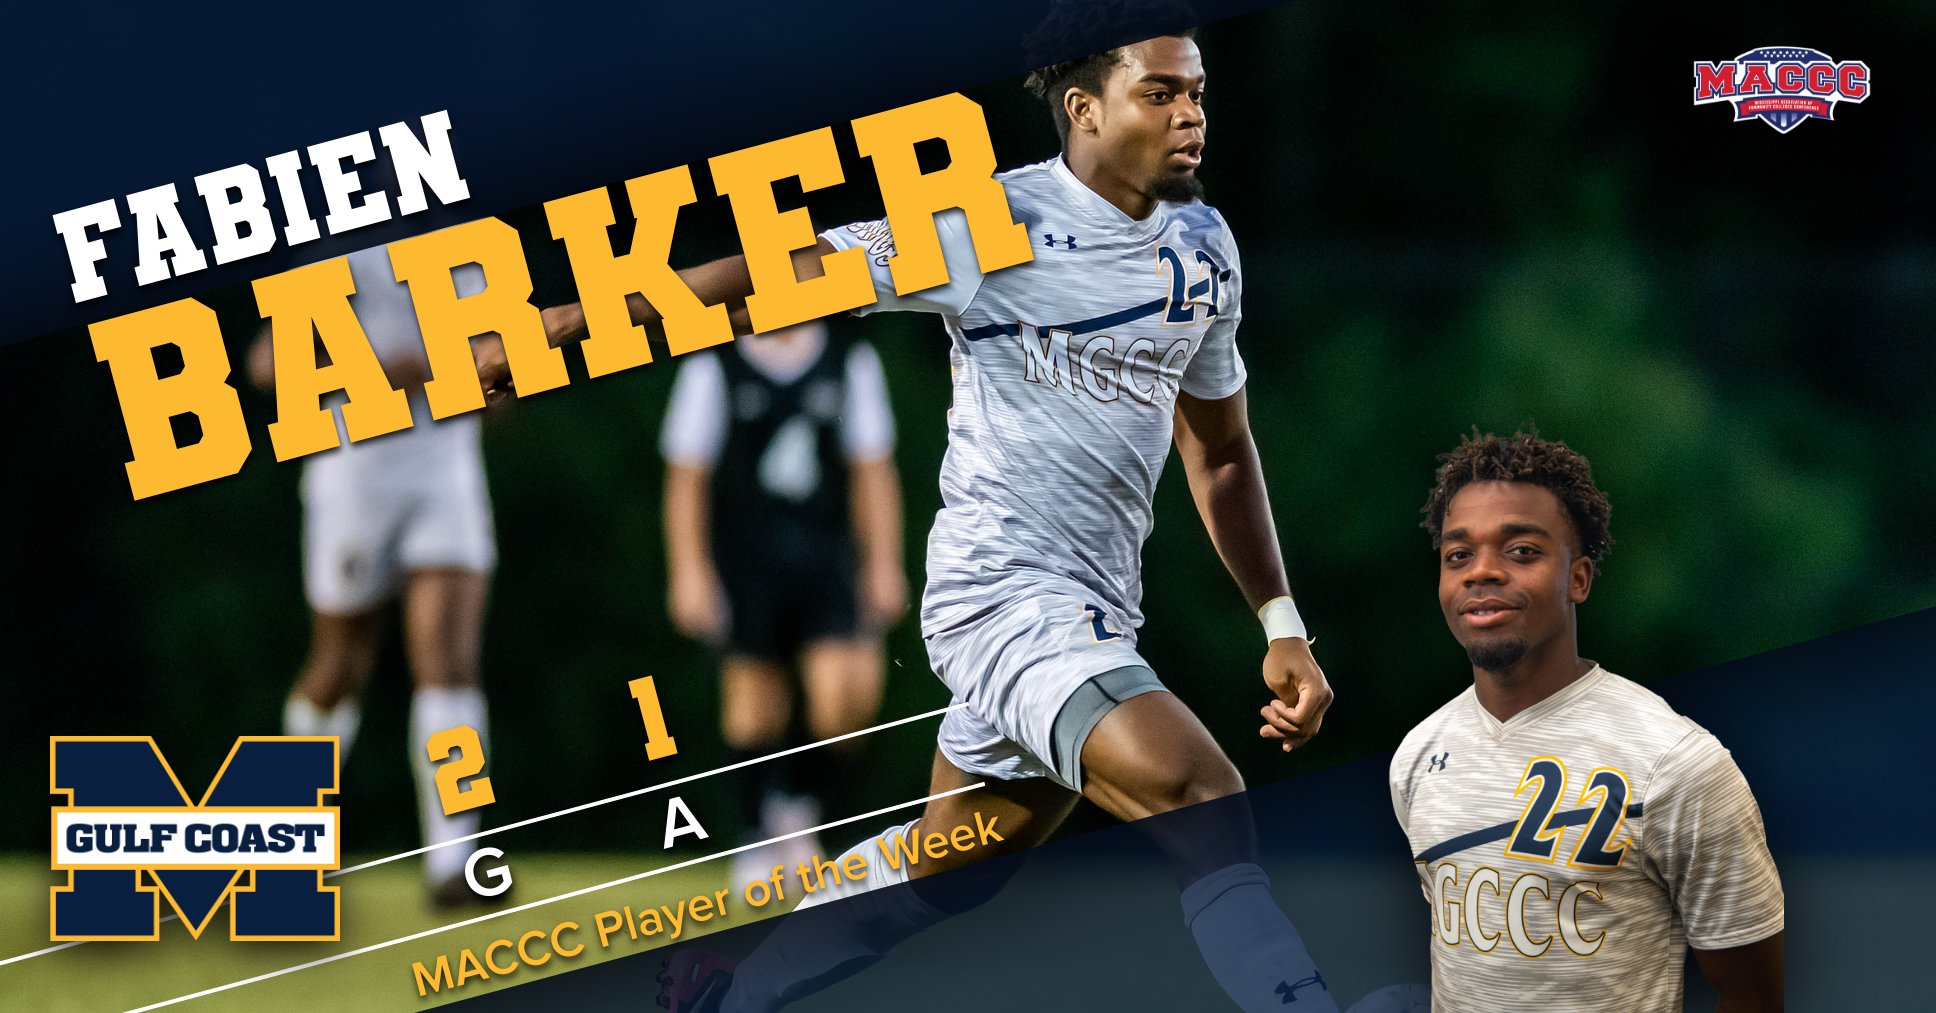 Barker named MACCC Player of the Week